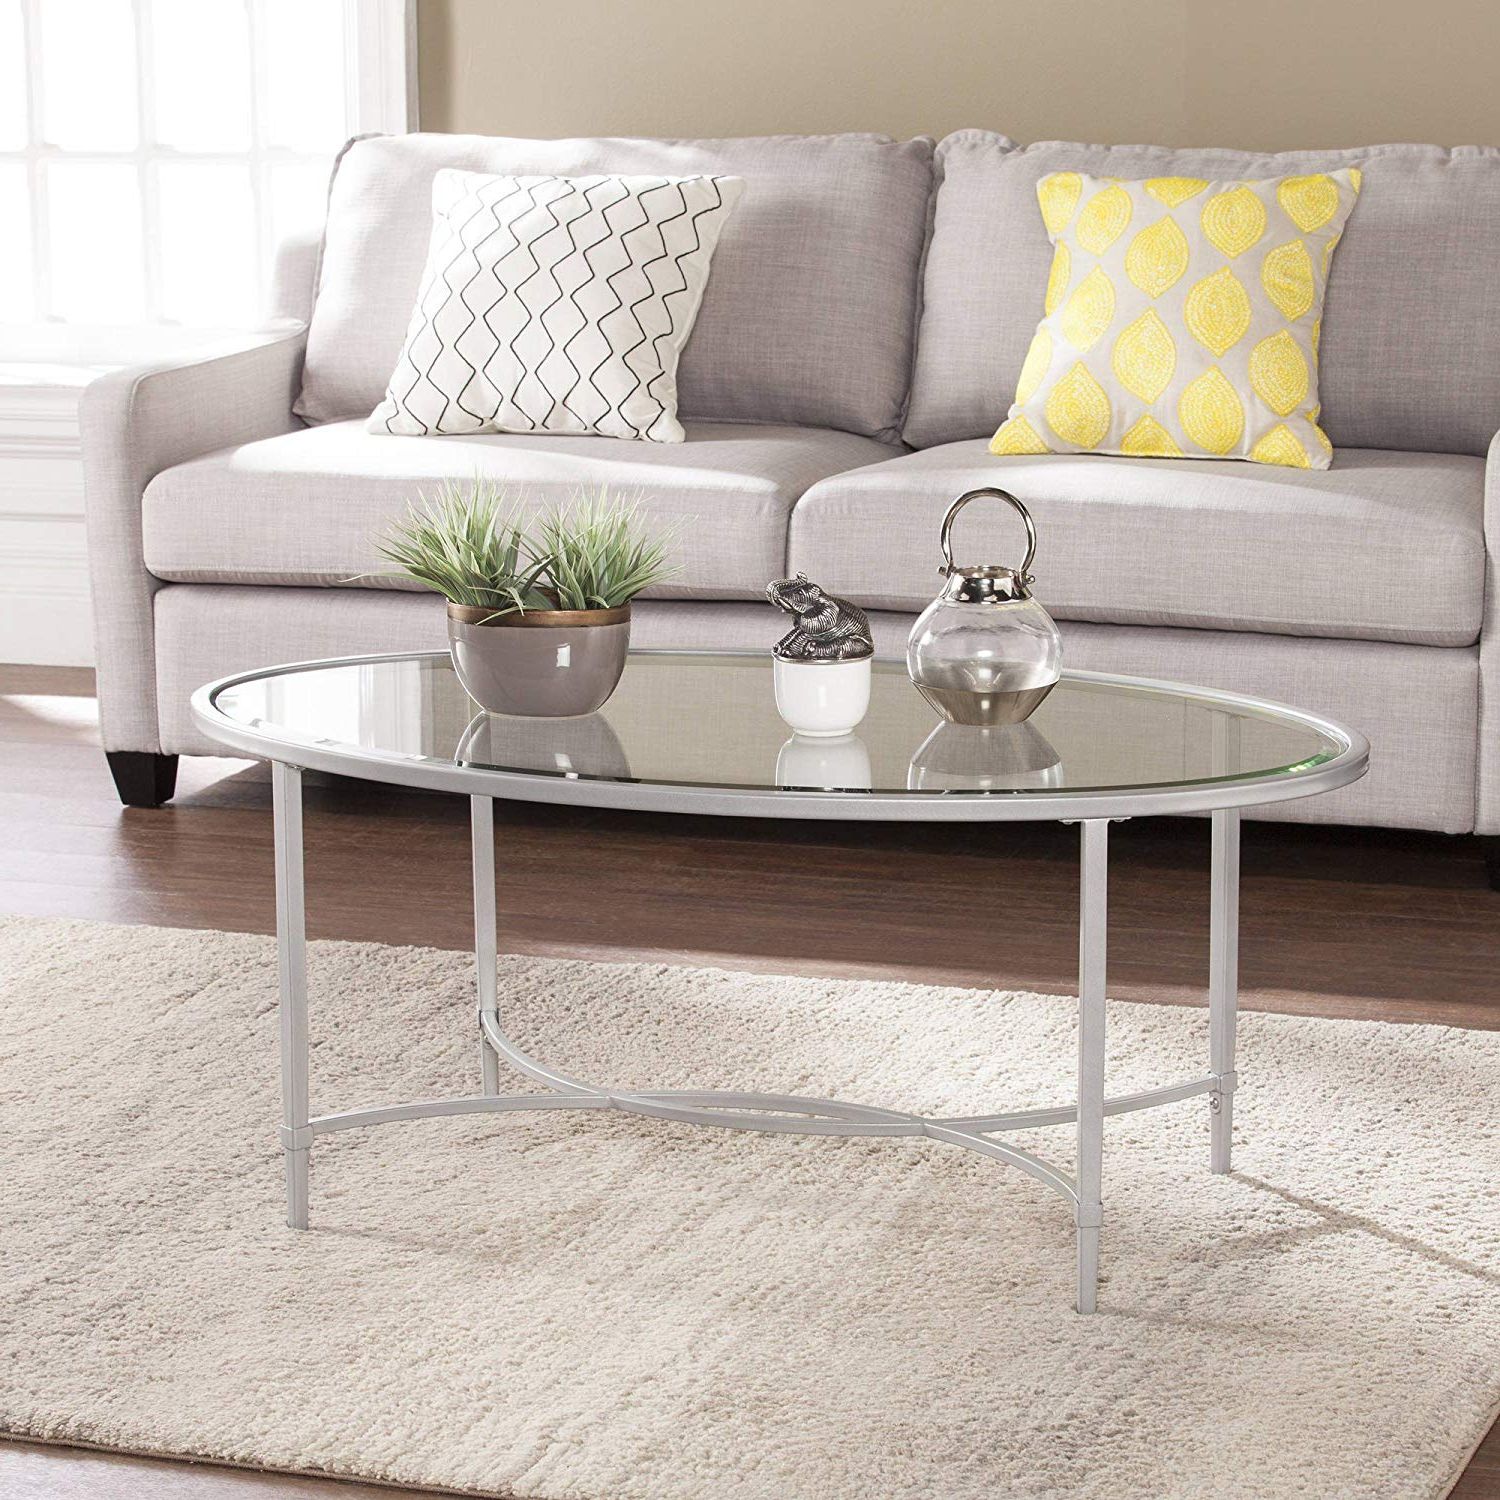 Cheap Silver Glass Coffee Table, Find Silver Glass Coffee Within Current Cream And Gold Coffee Tables (View 1 of 20)